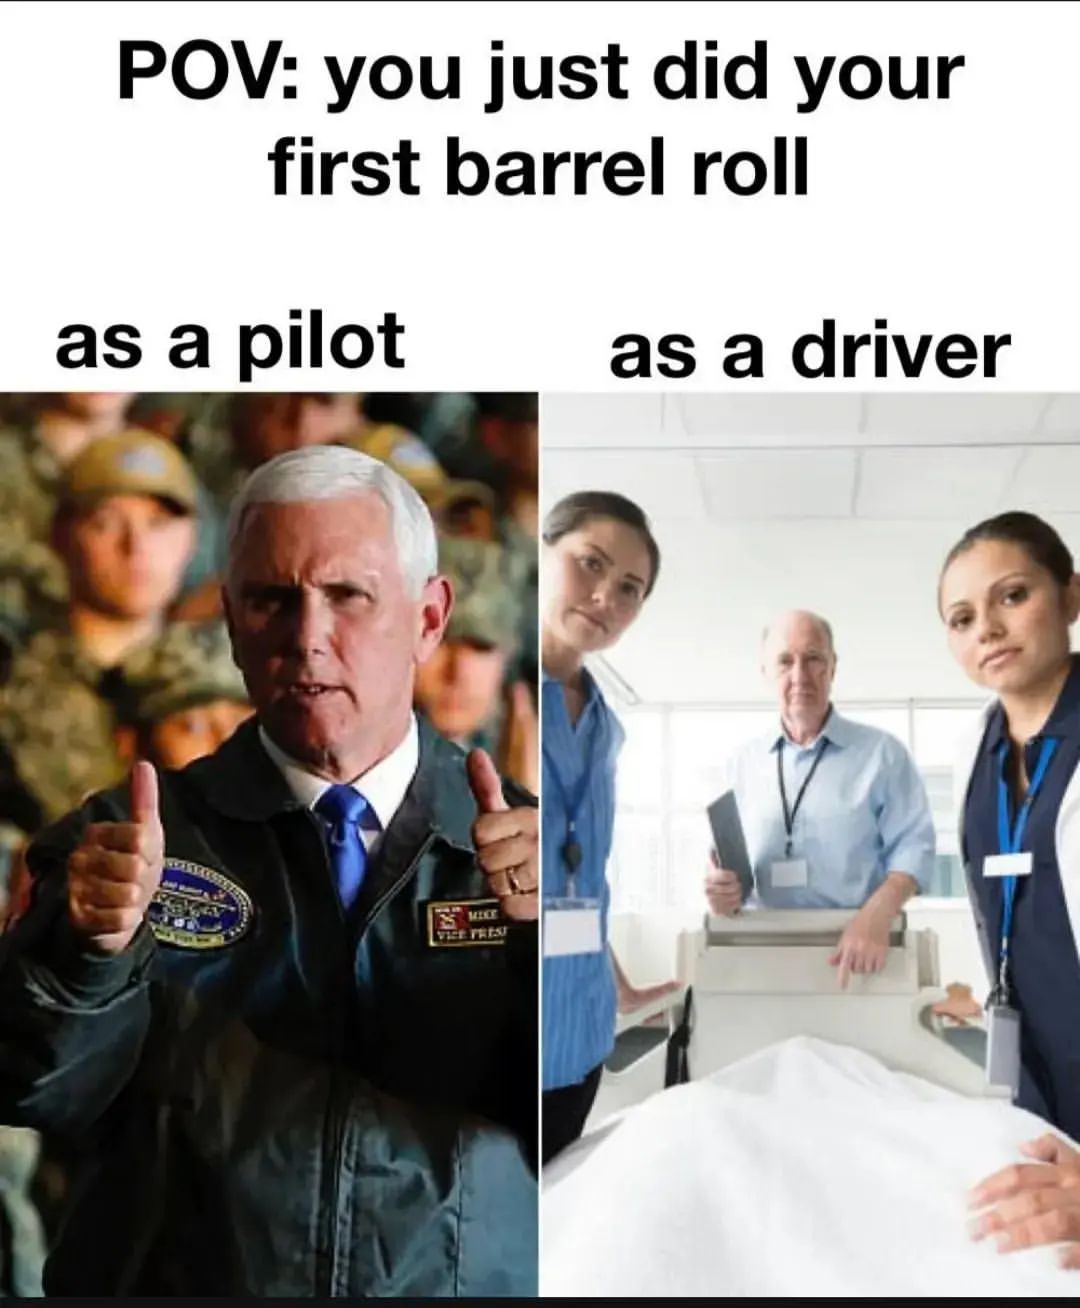 POV: You just did your first barrel roll as a pilot as a driver.